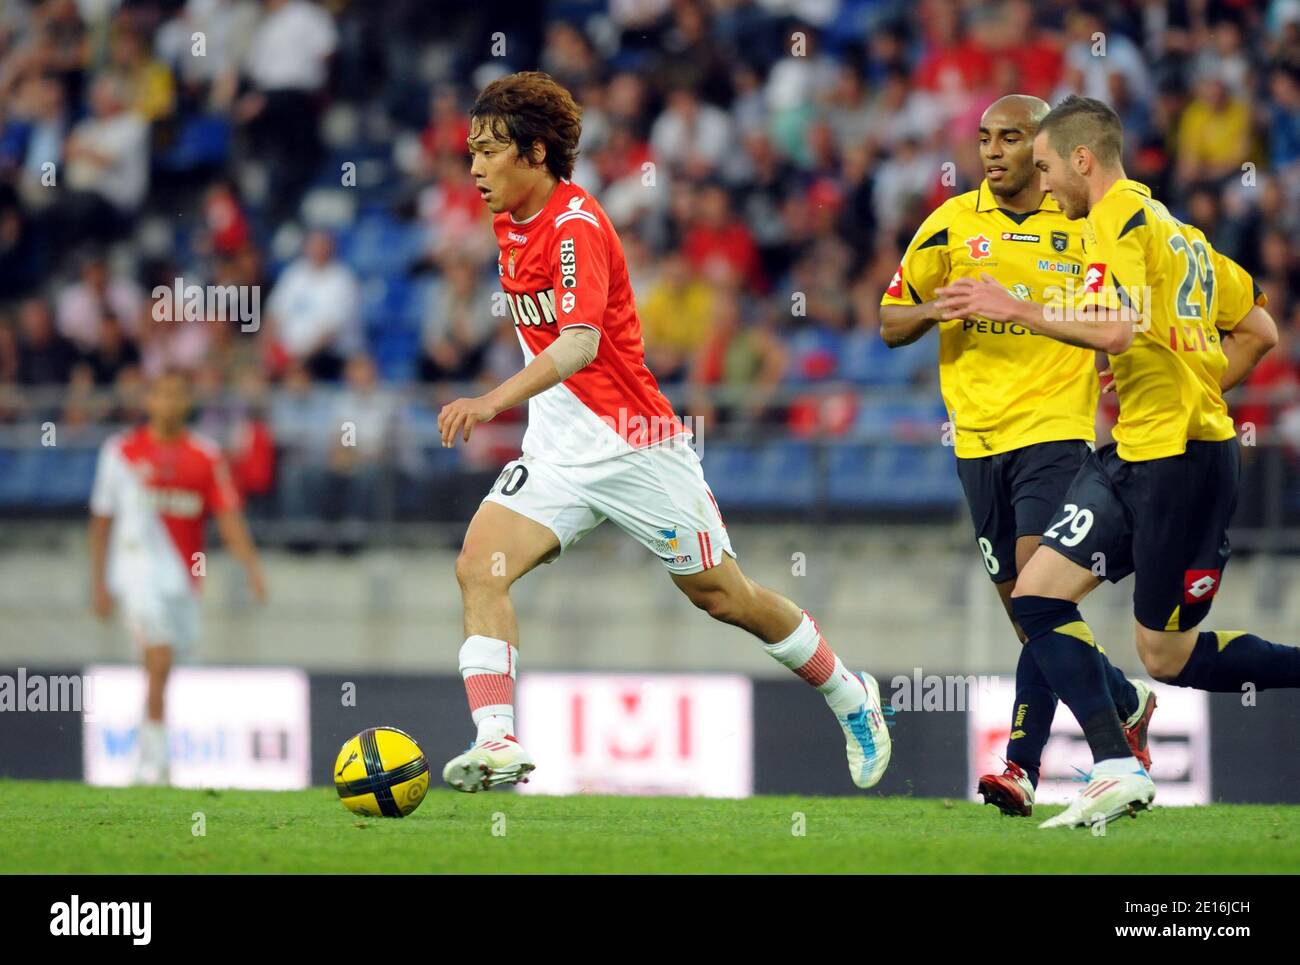 AS Monaco's player Chu Young Park during the French First League match, FC Sochaux vs AS Monaco at Bonal stadium in Sochaux, France on May 11, 2011. Sochaux won 3-0 . Photo by Damien Gautier/ABACAPRESS.COM Stock Photo